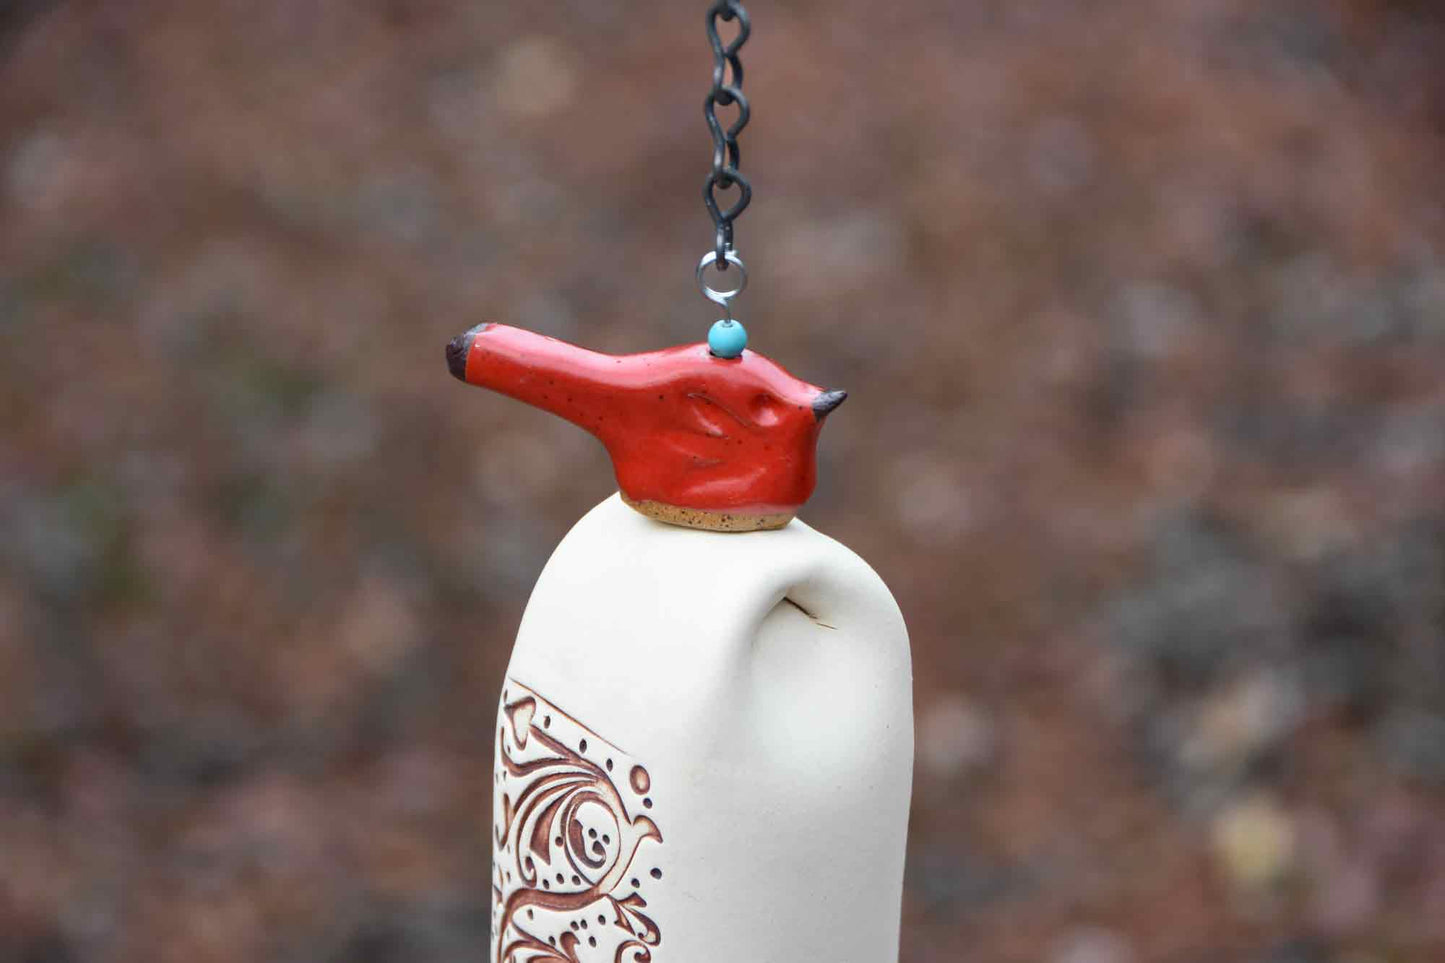 Ceramic Wind Chime for Traditional 9th Anniversary Gift - EarthWind Bells